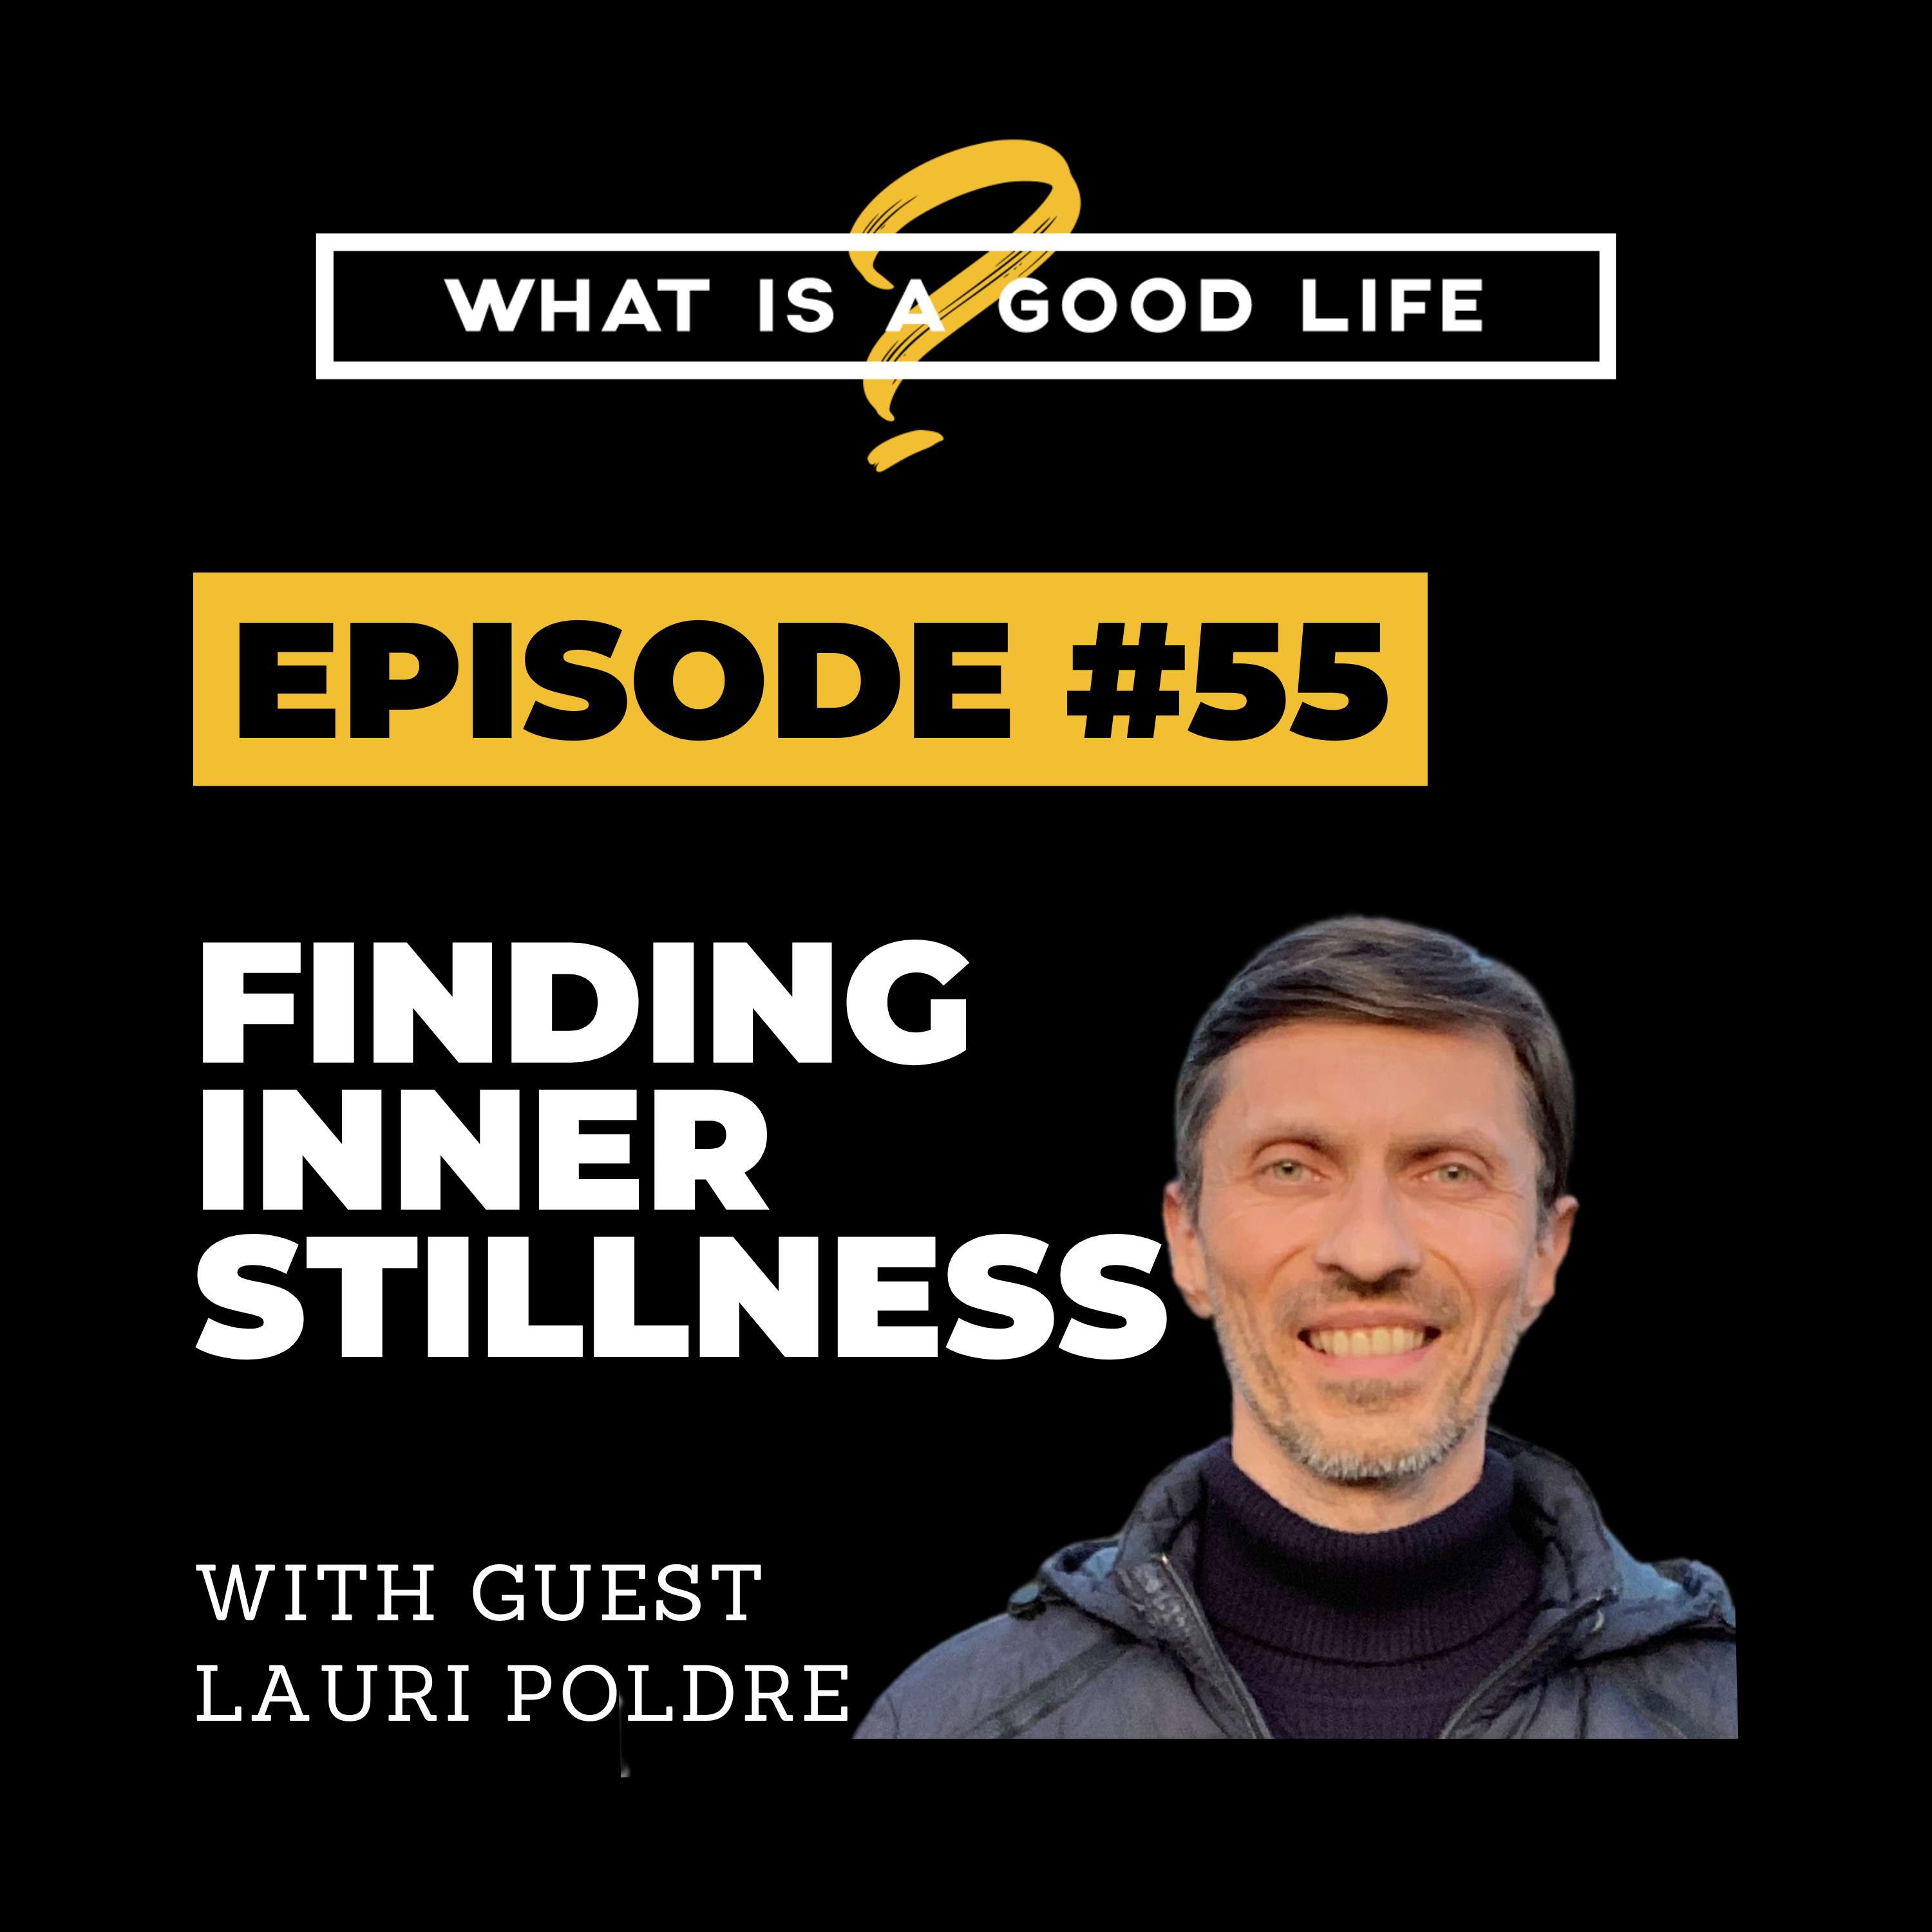 What is a Good Life? #55 - Finding Inner Stillness with Lauri Poldre